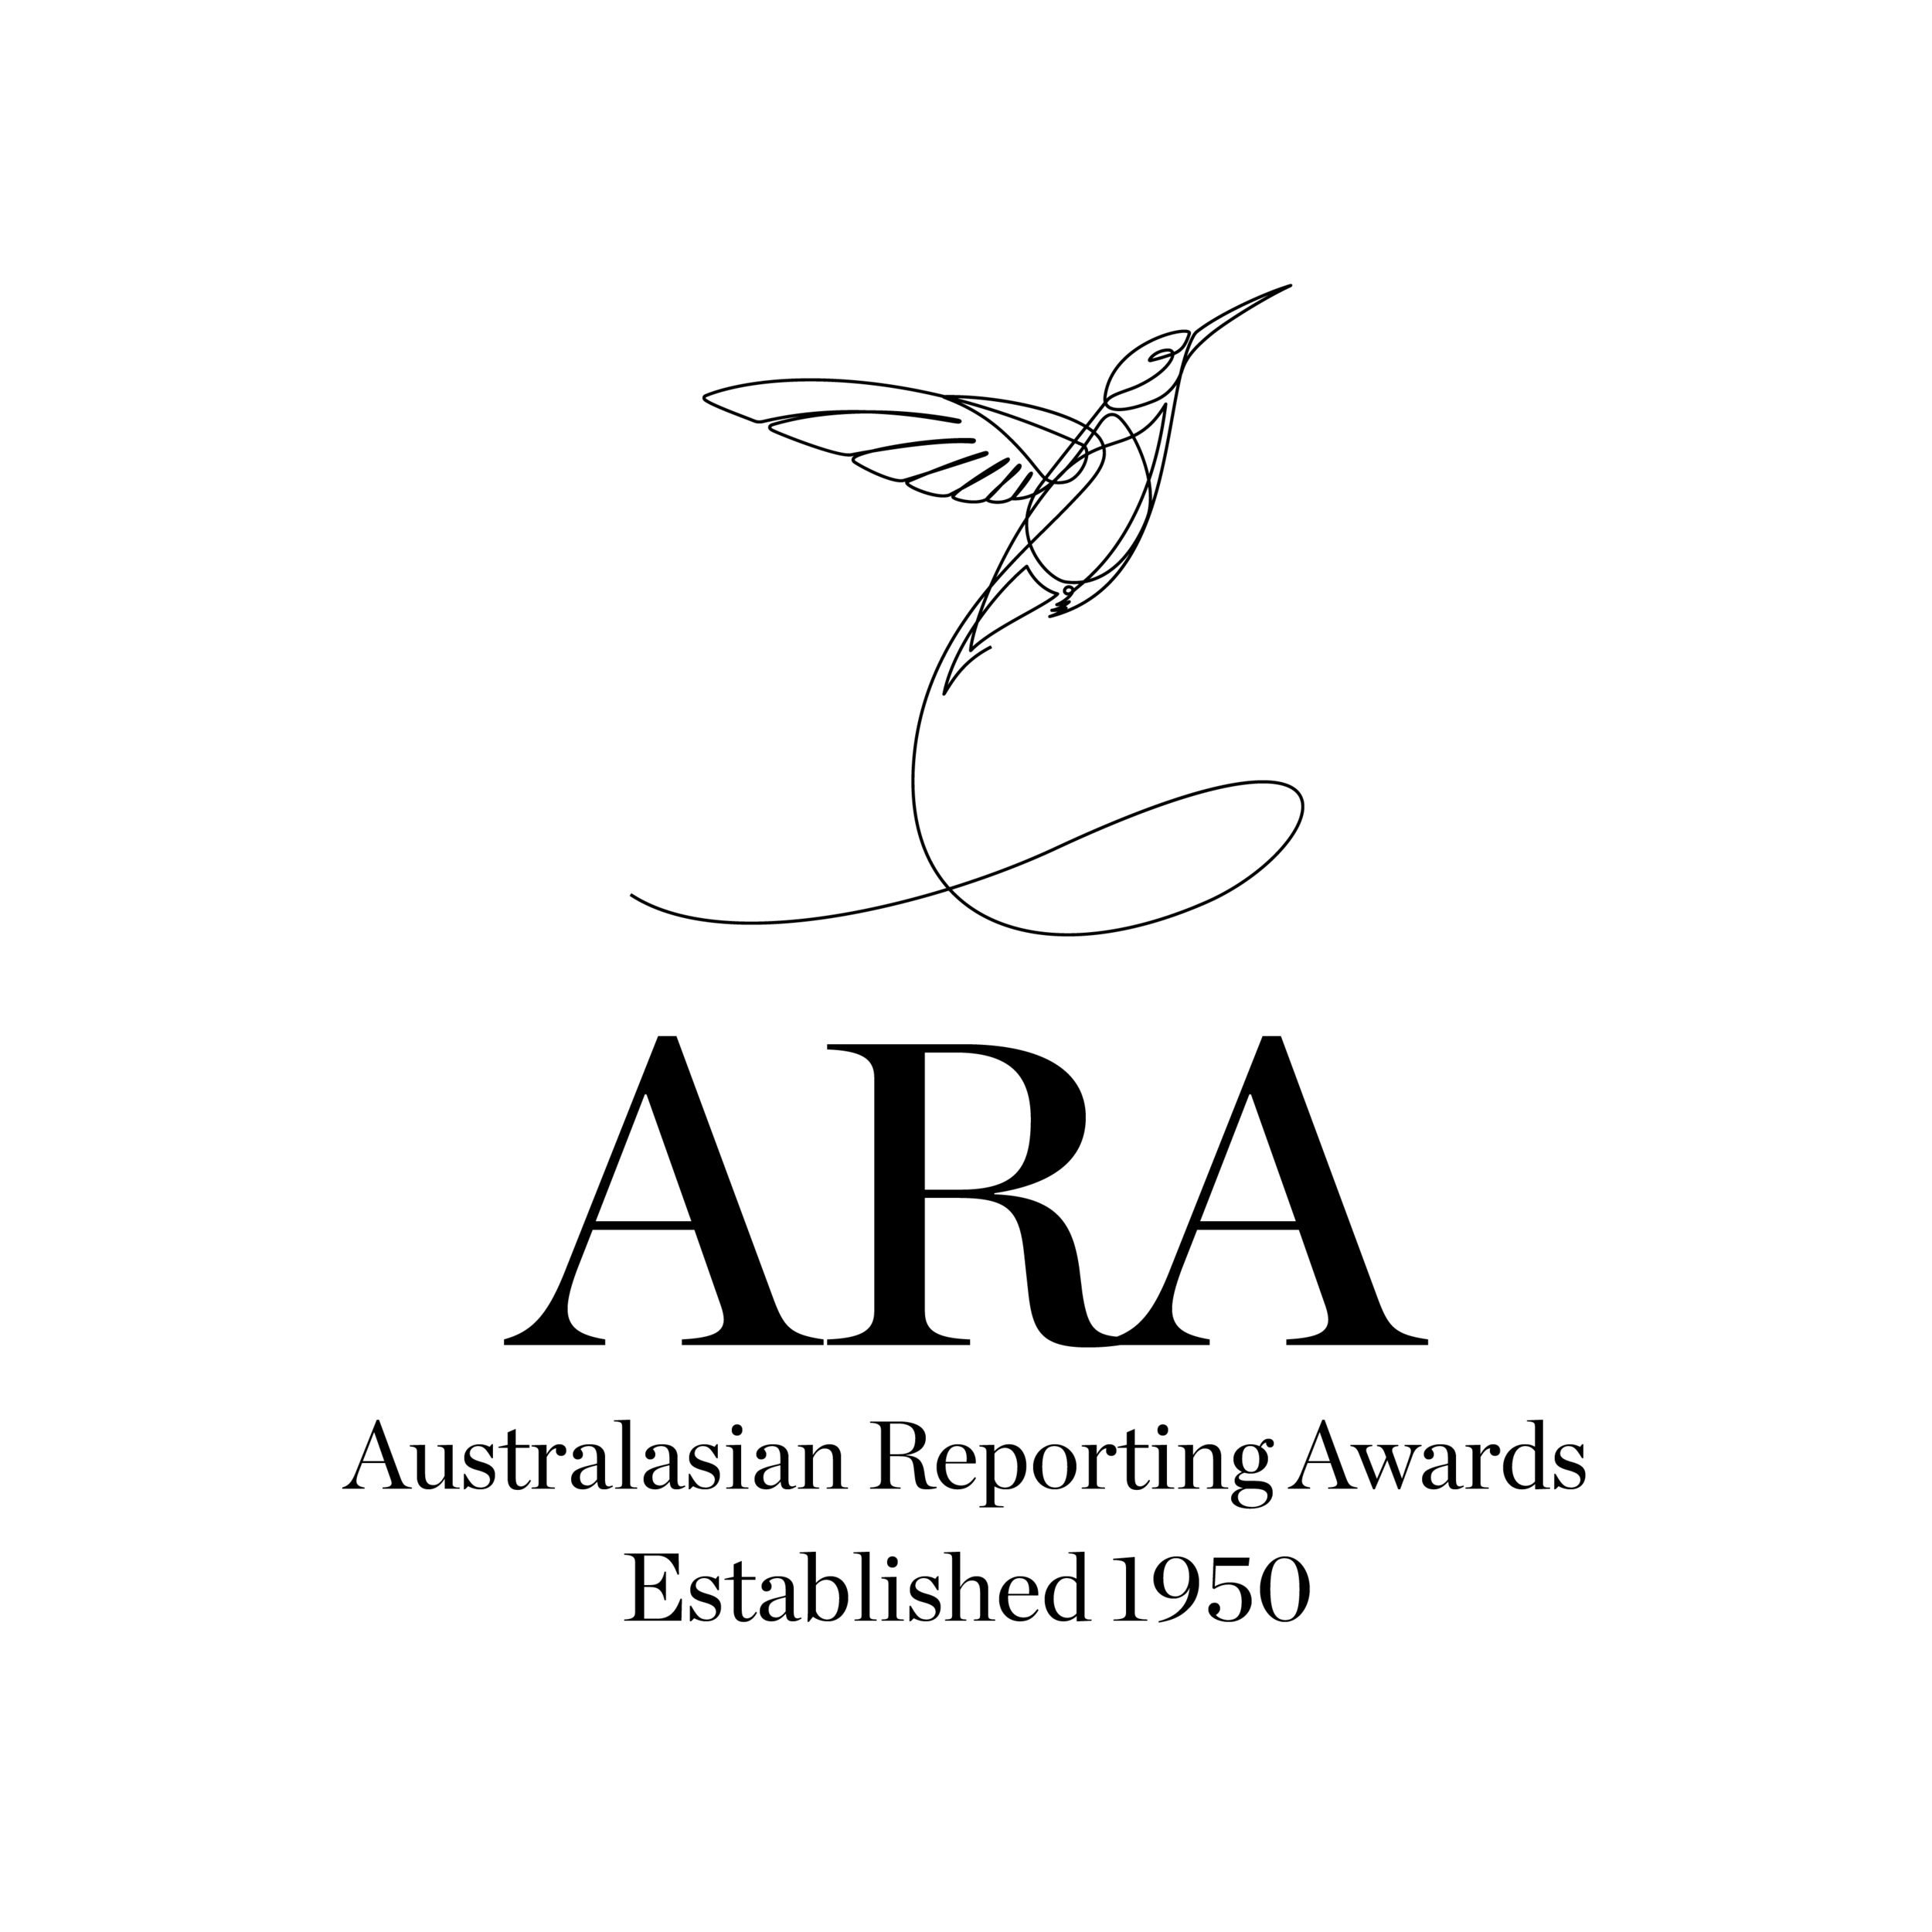 Winning the Australasian Reporting Awards: Does It Matter?